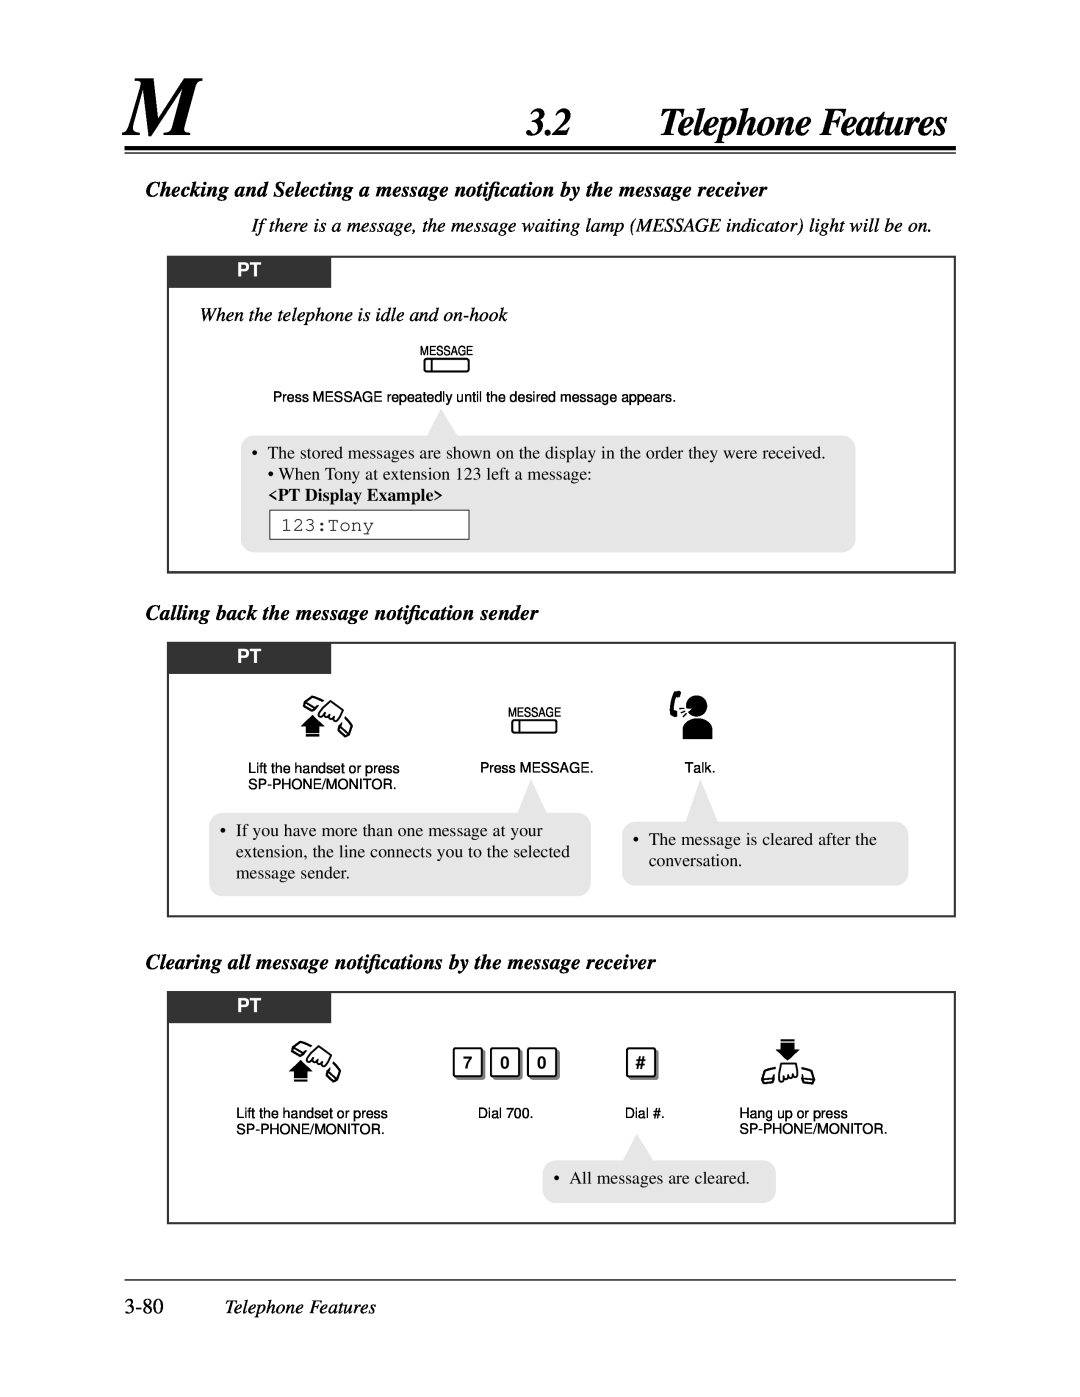 Panasonic KX-TA624 user manual Calling back the message notiﬁcation sender, 3.2Telephone Features 